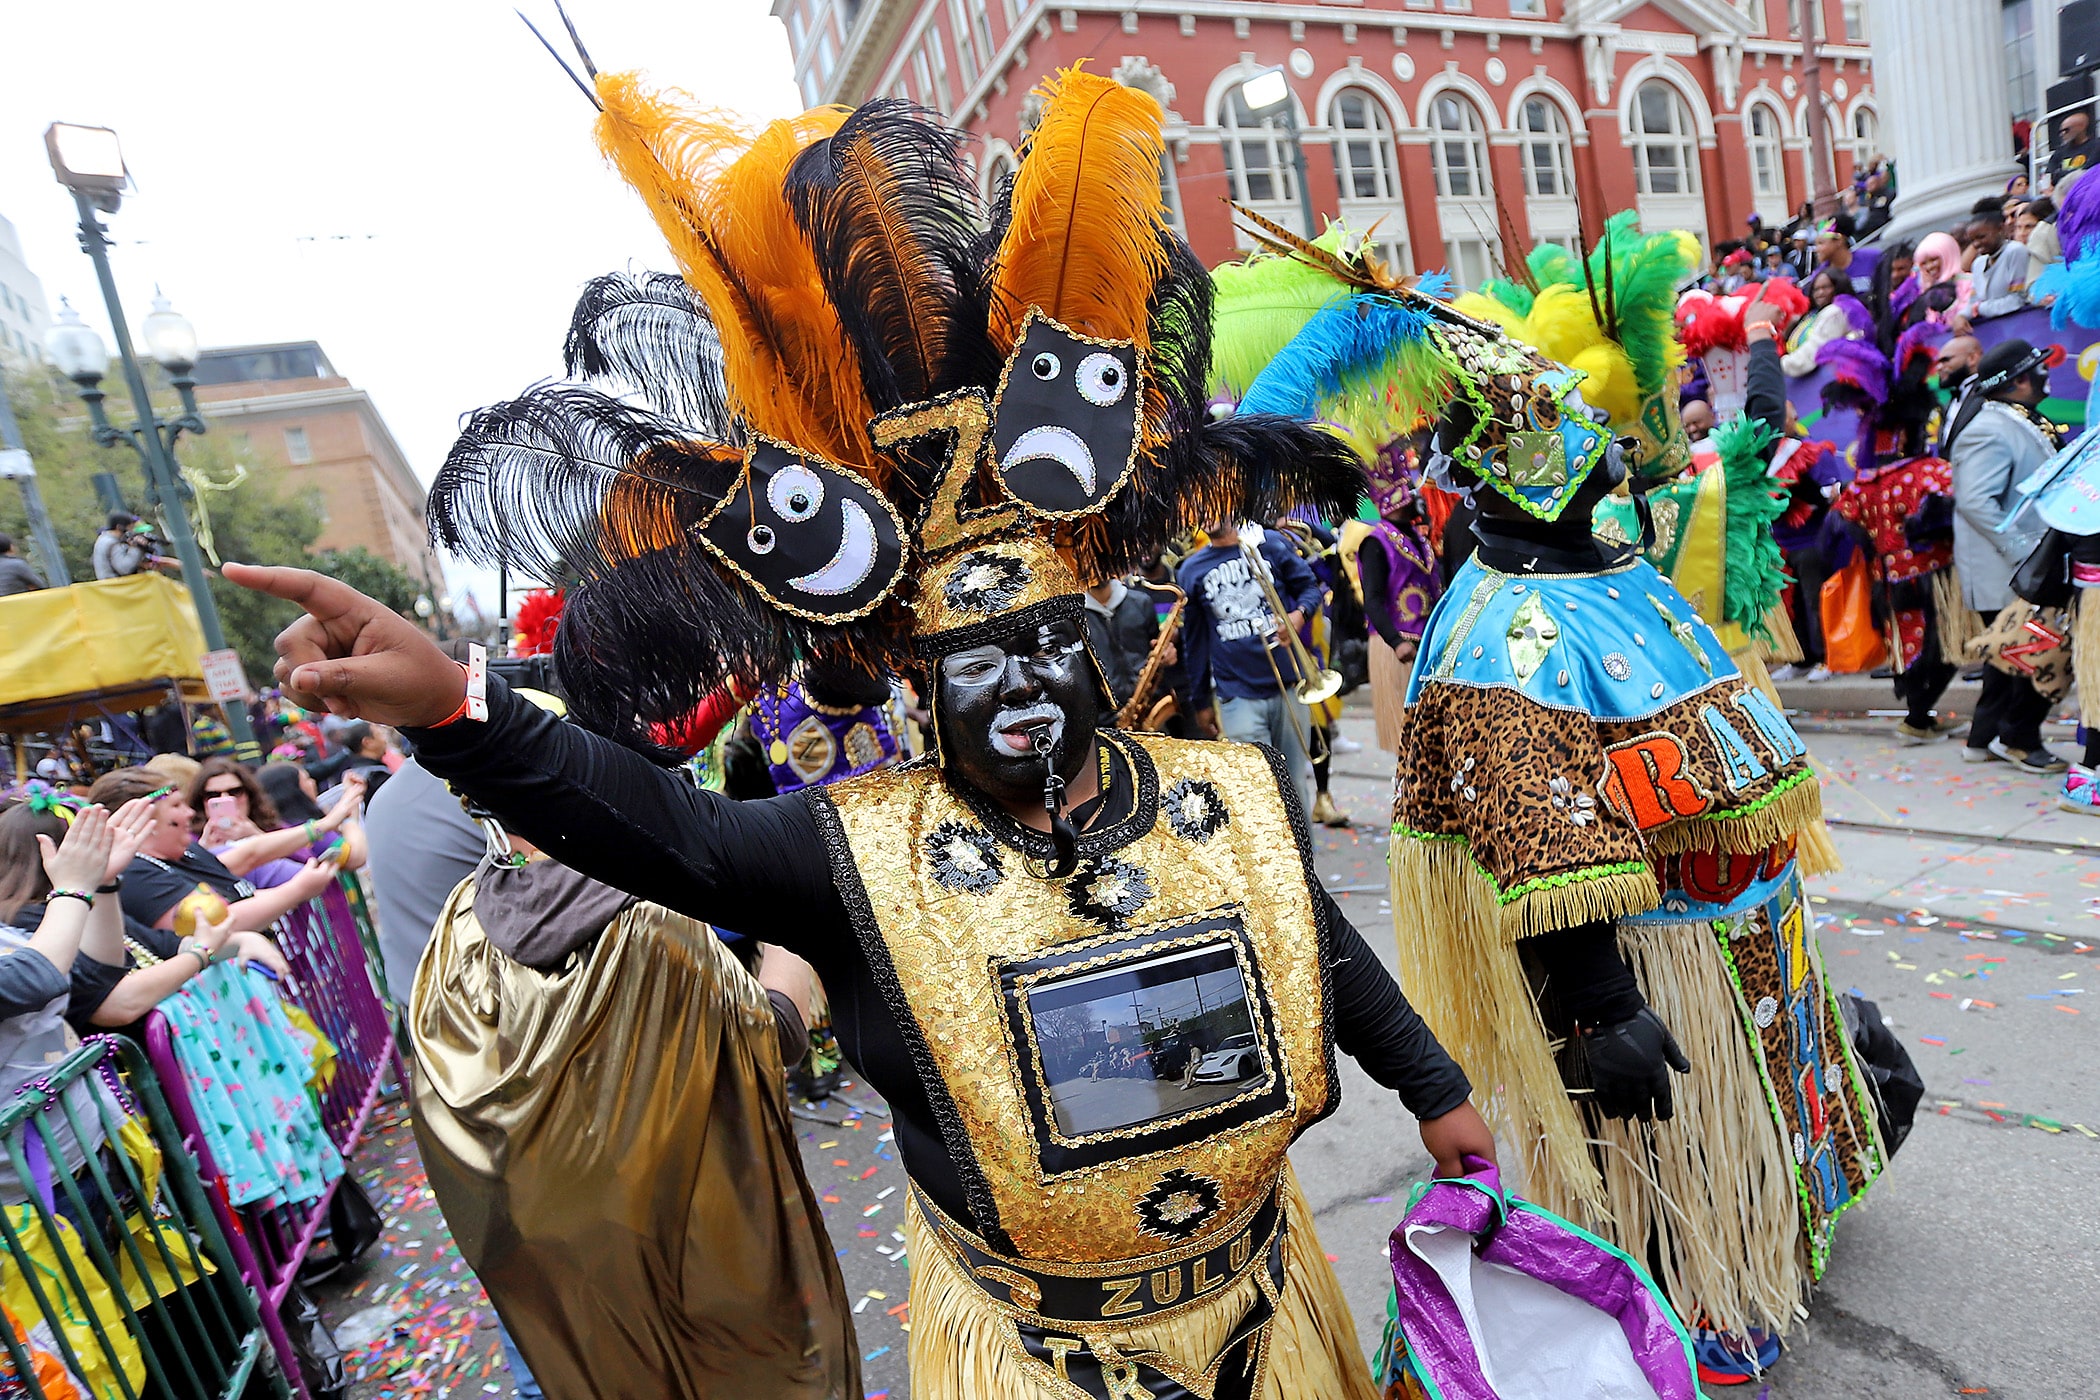 A marching group passes Gallier Hall as the 1,500 members of the Zulu, led by their King Brian M. Sims and Queen Dr. Chanda Macias, roll up St. Charles Avenue with their parade entitled “Zulu’s Book of Love and Cinema” on Mardi Gras Day, 2020. (Photo by Michael DeMocker)